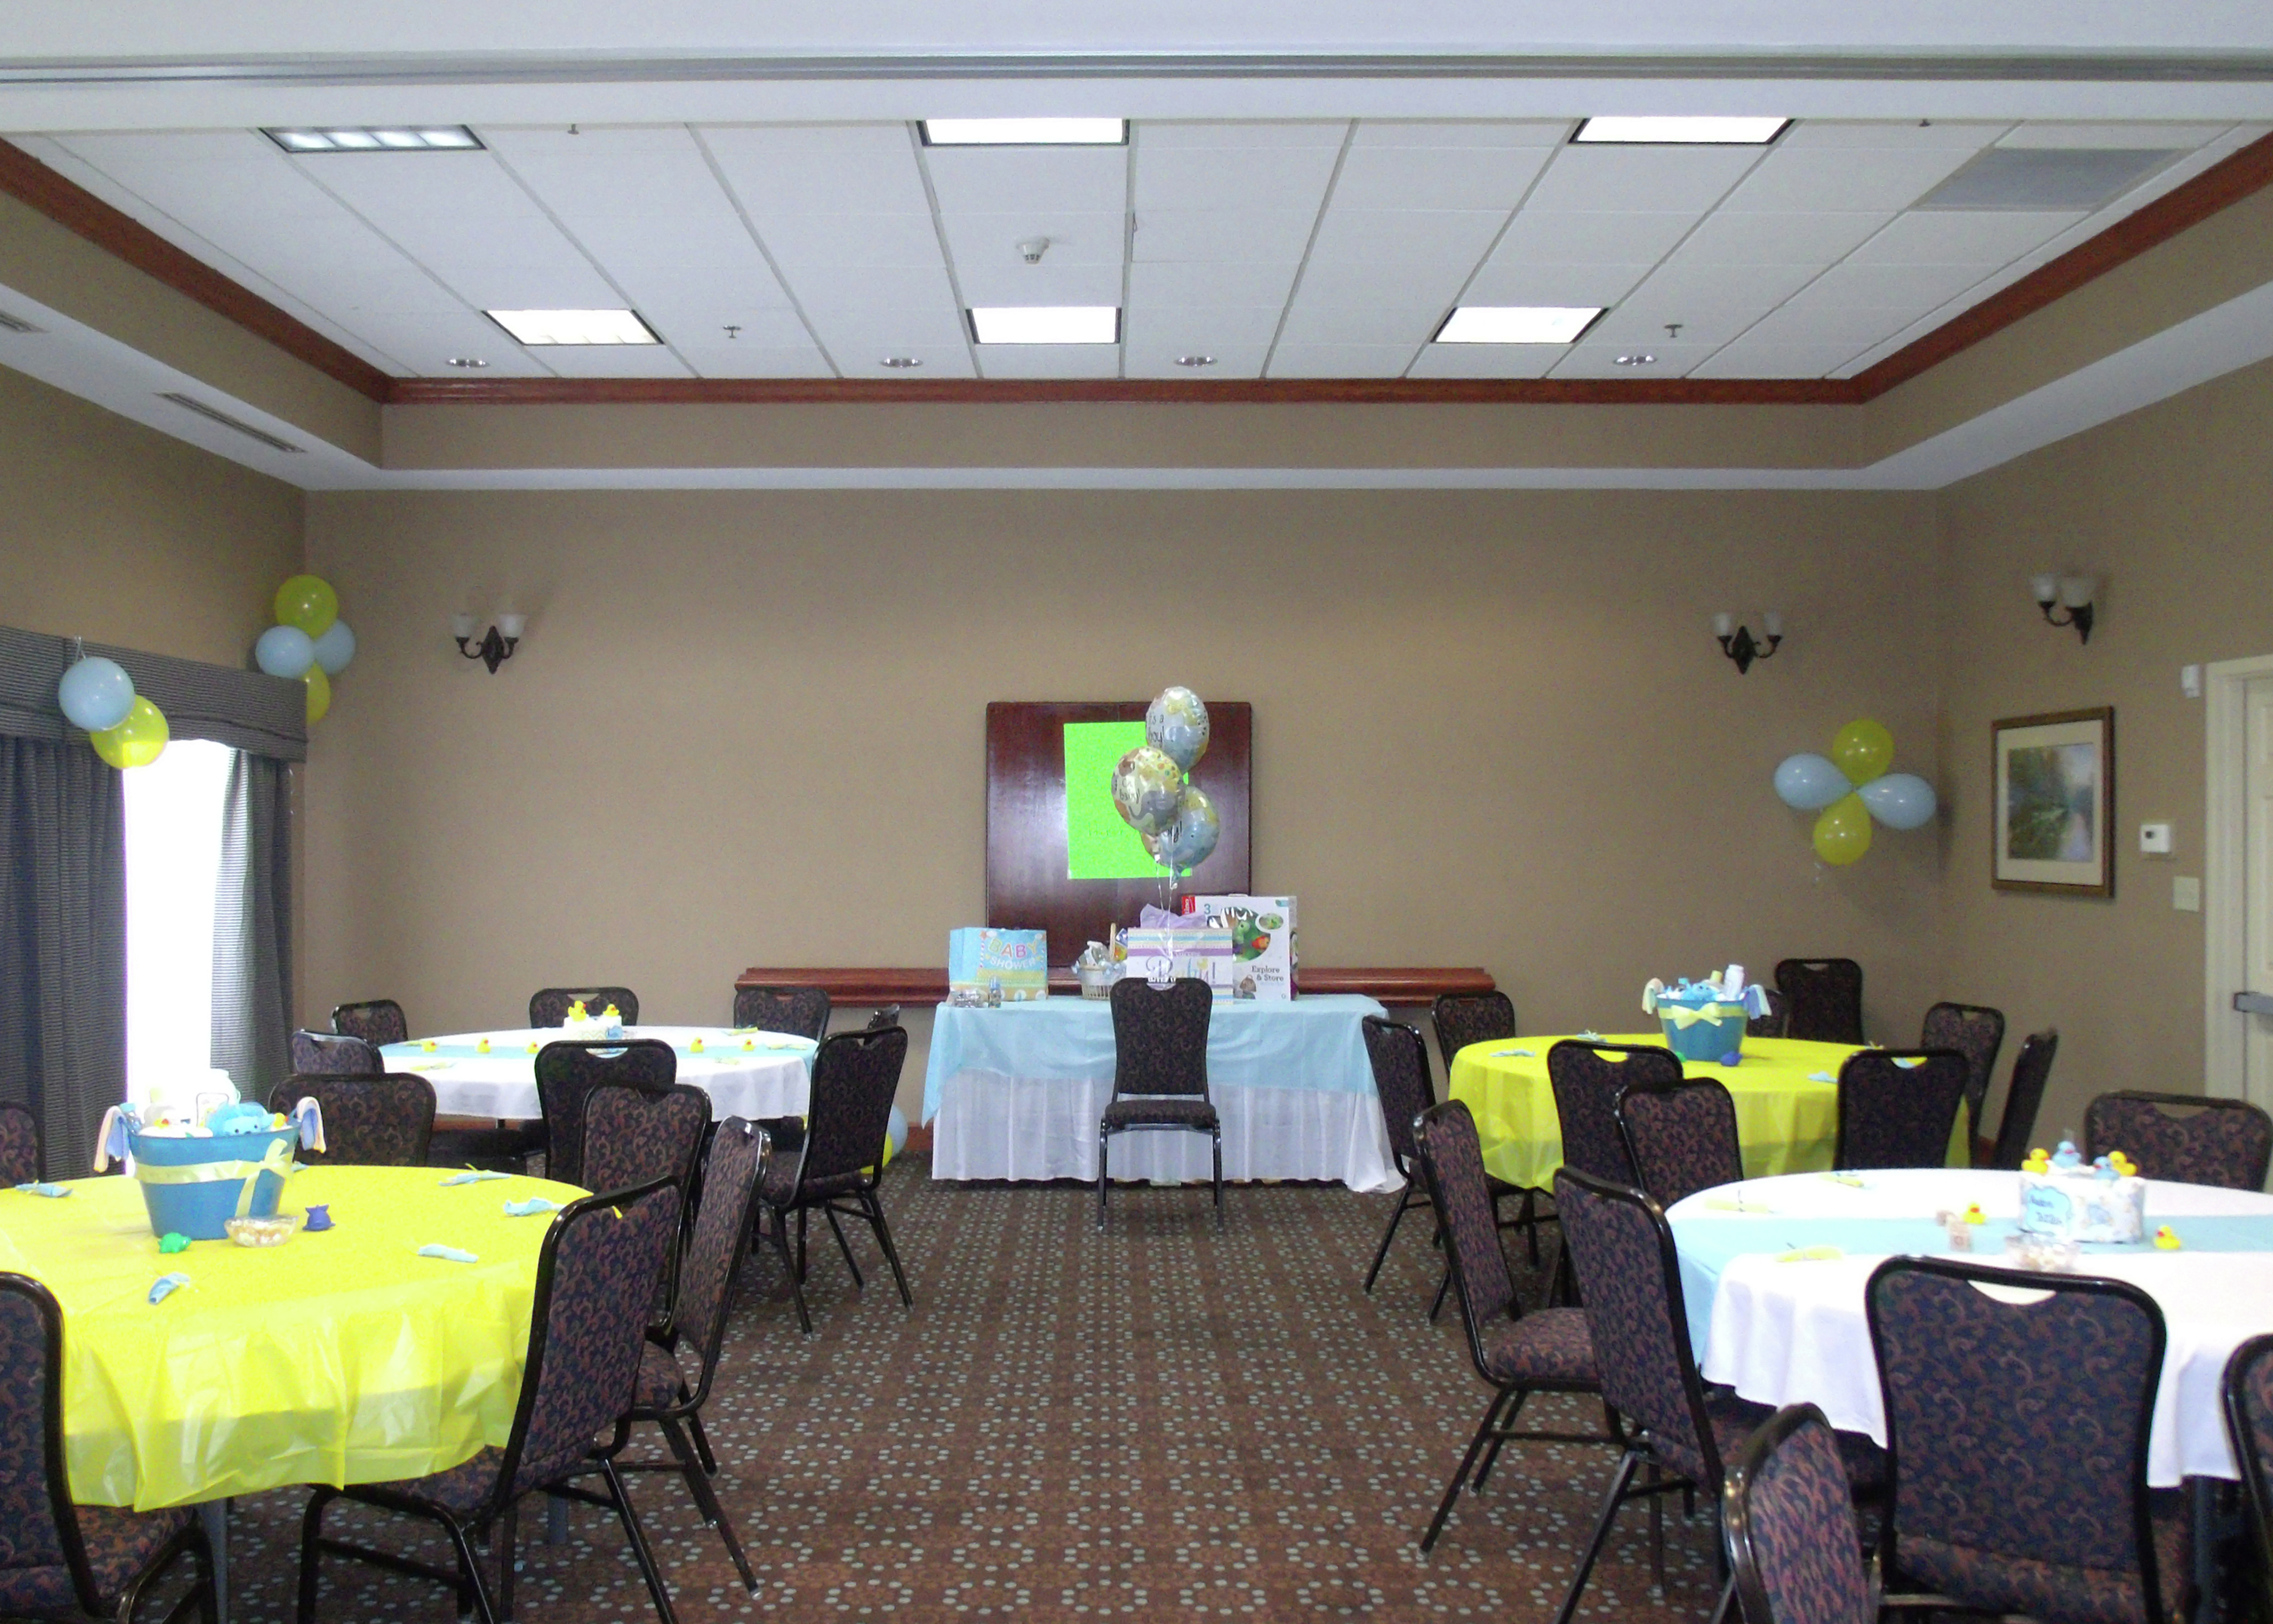 Meeting Room with Round Decorated Banquet Tables